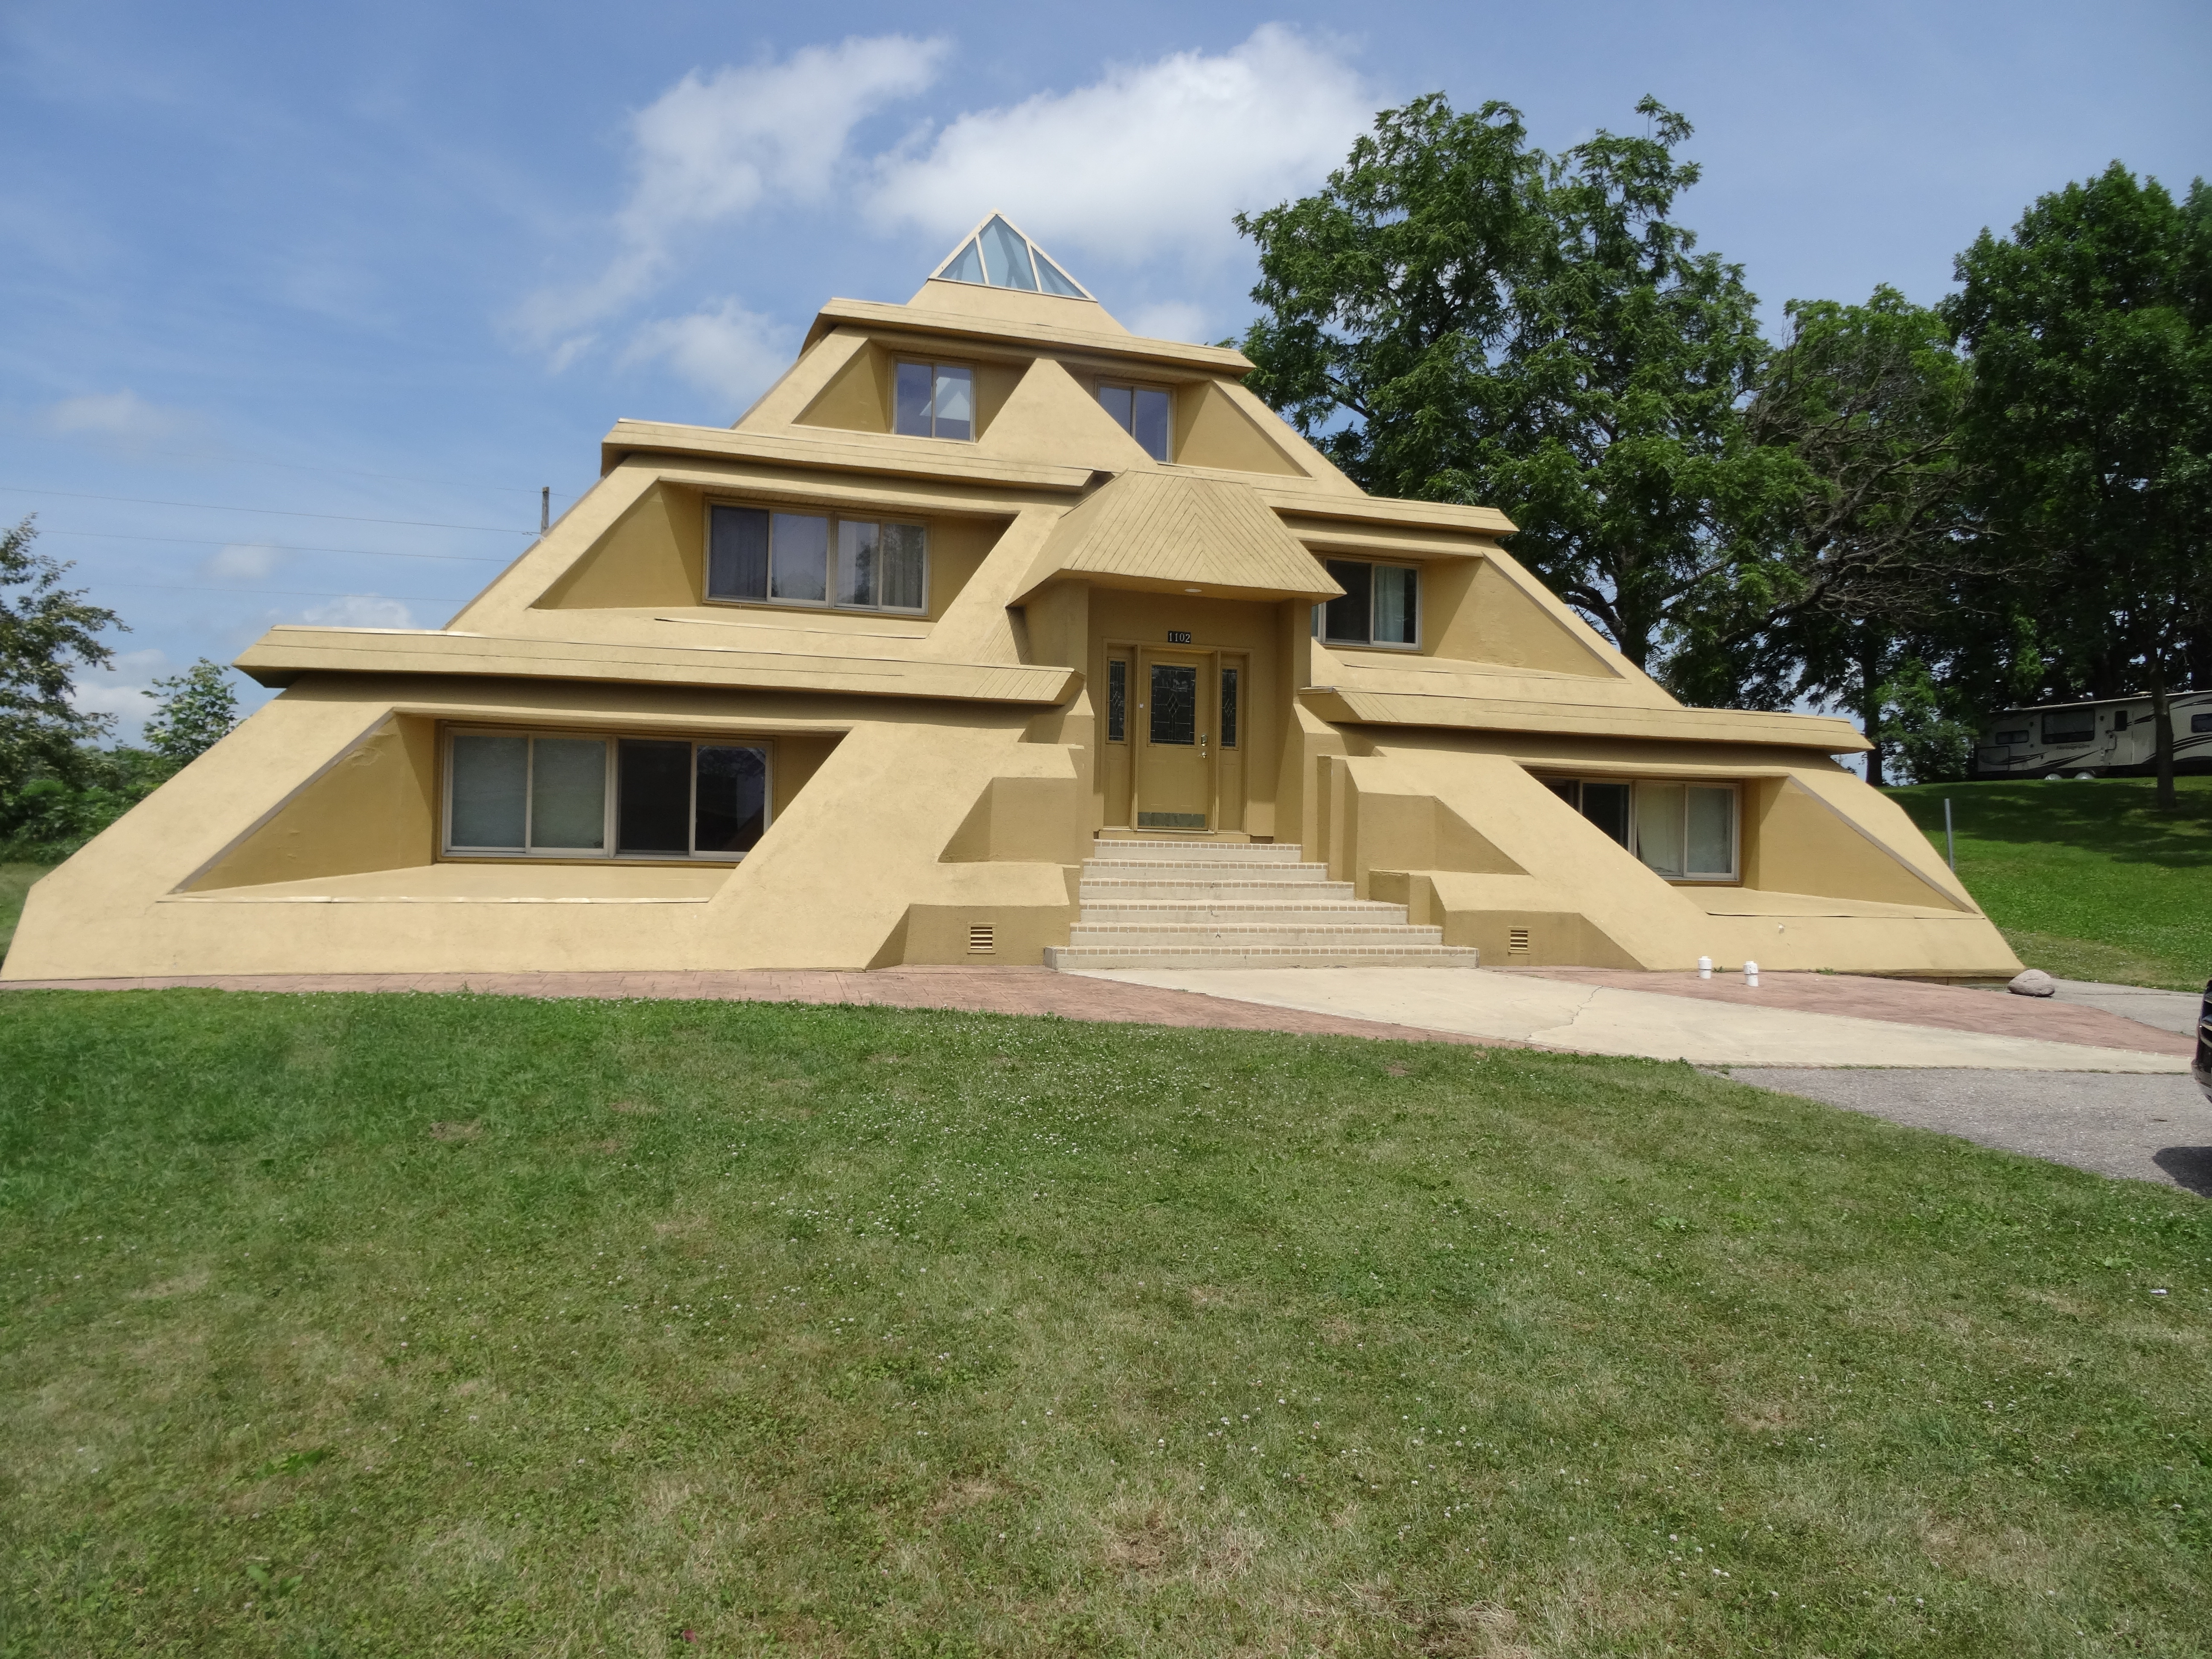 PYRAMID HOUSE - 5,600 Sq Ft - 6 BR Home - Houses for Rent in Clear